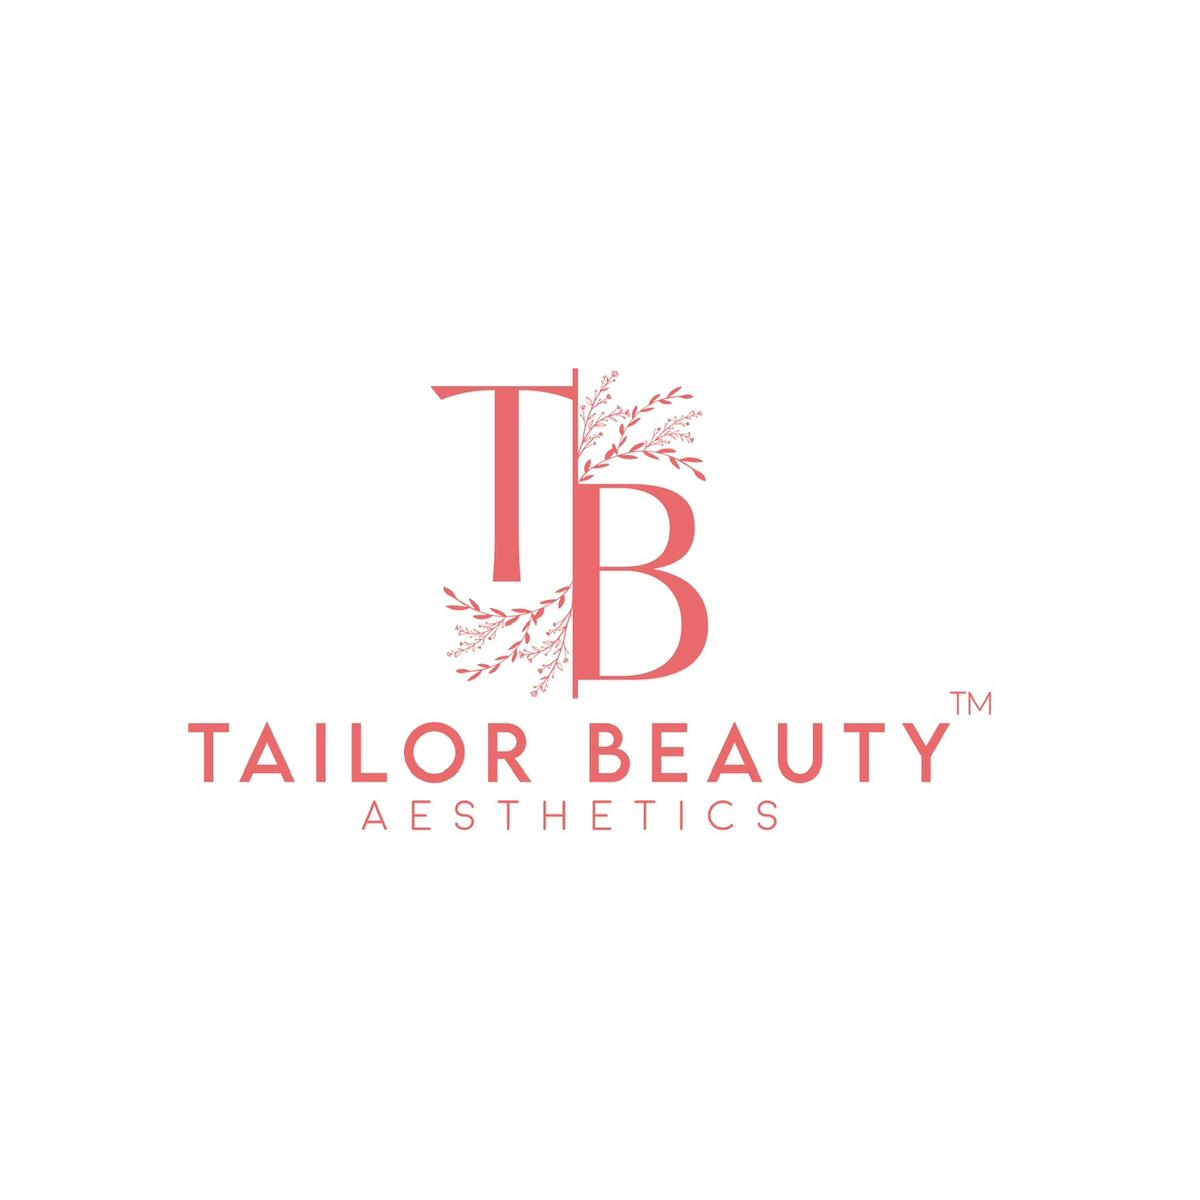 TailorBeautyAes's images